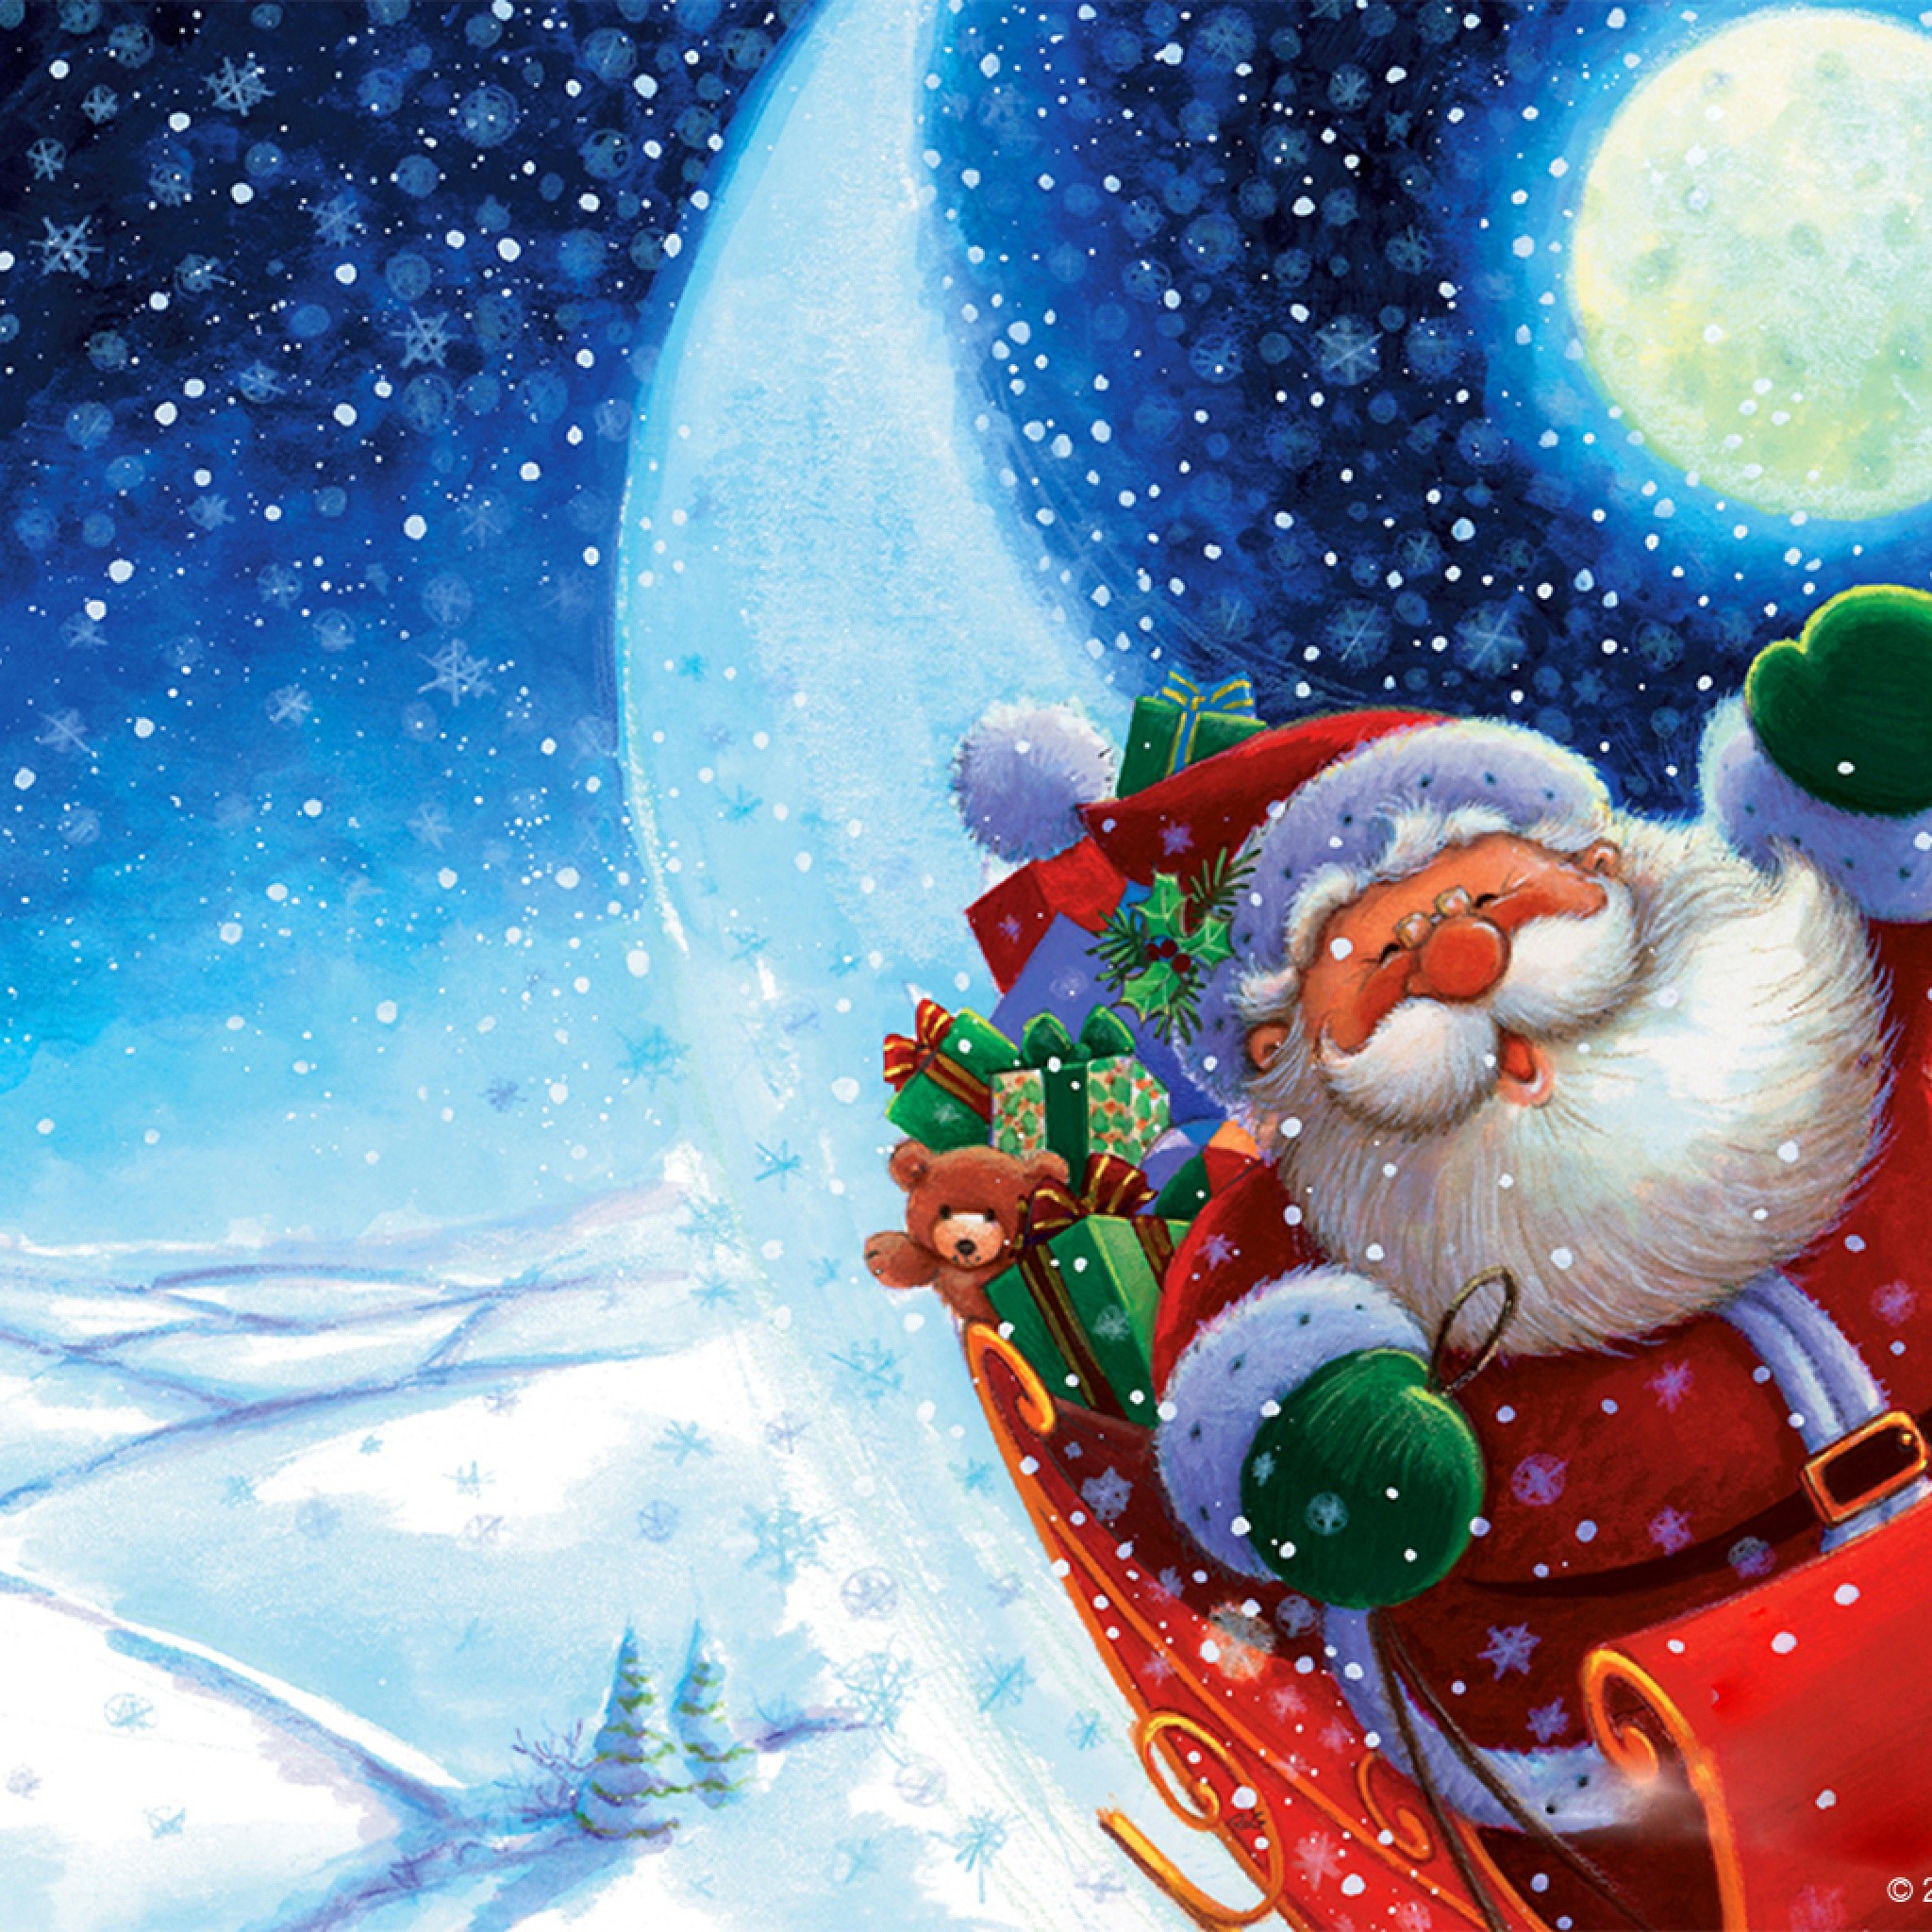 Christmas Ipad Wallpapers Free Download - Cool Christmas Backgrounds - HD Wallpaper 